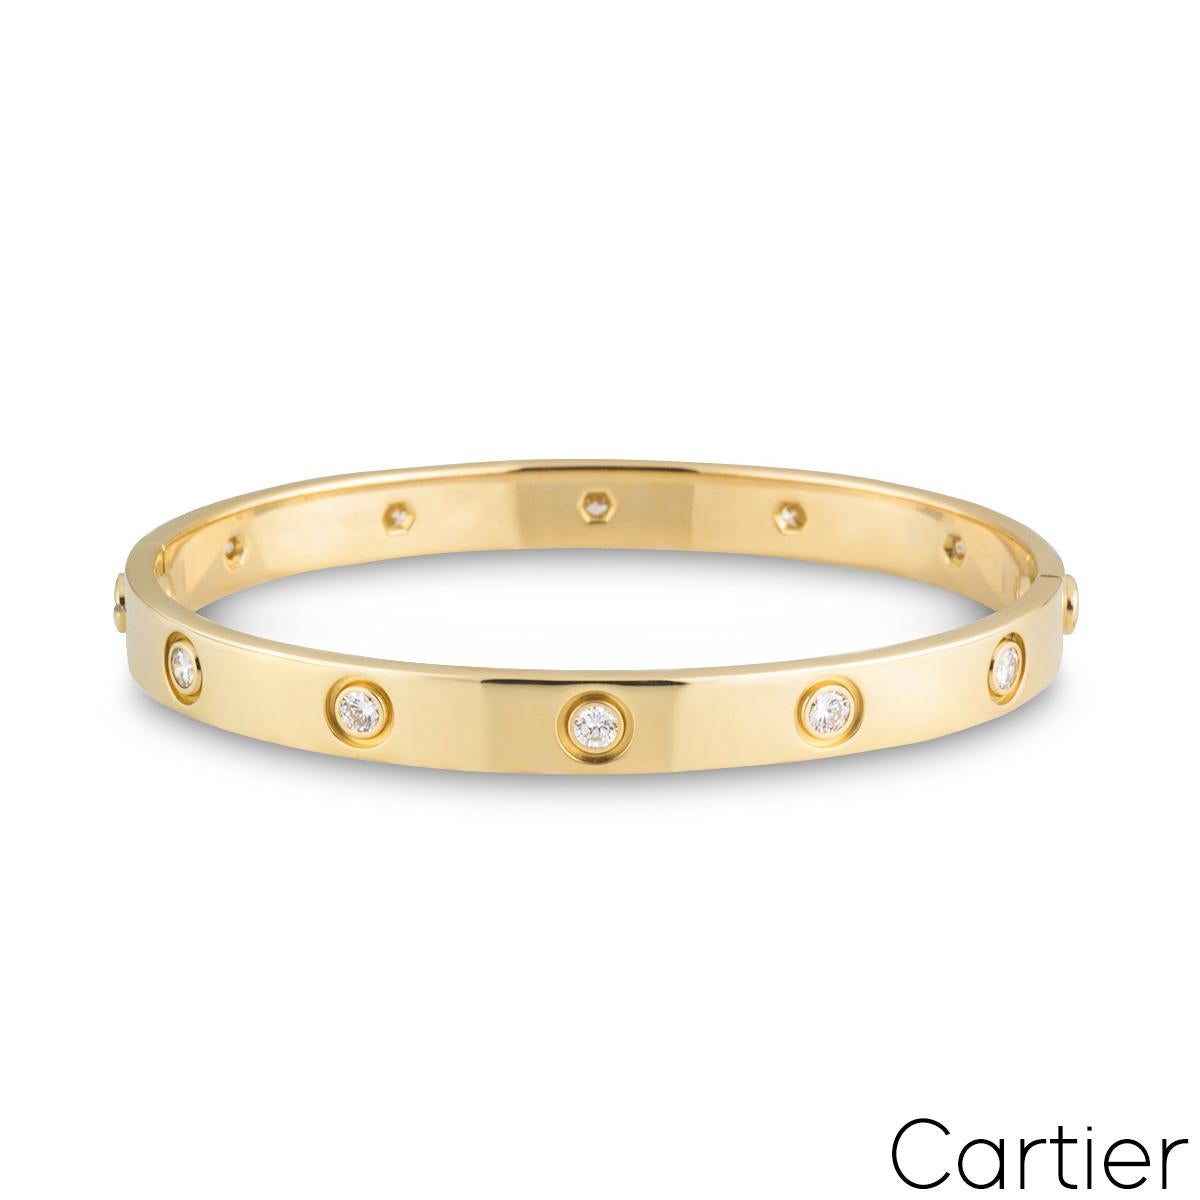 An iconic 18k yellow gold full diamond bracelet by Cartier from the Love collection. The bracelet is set with 10 round brilliant cut diamonds in a rubover setting circulating the outer edge throughout totalling 0.96ct. The bracelet is a size 16 and